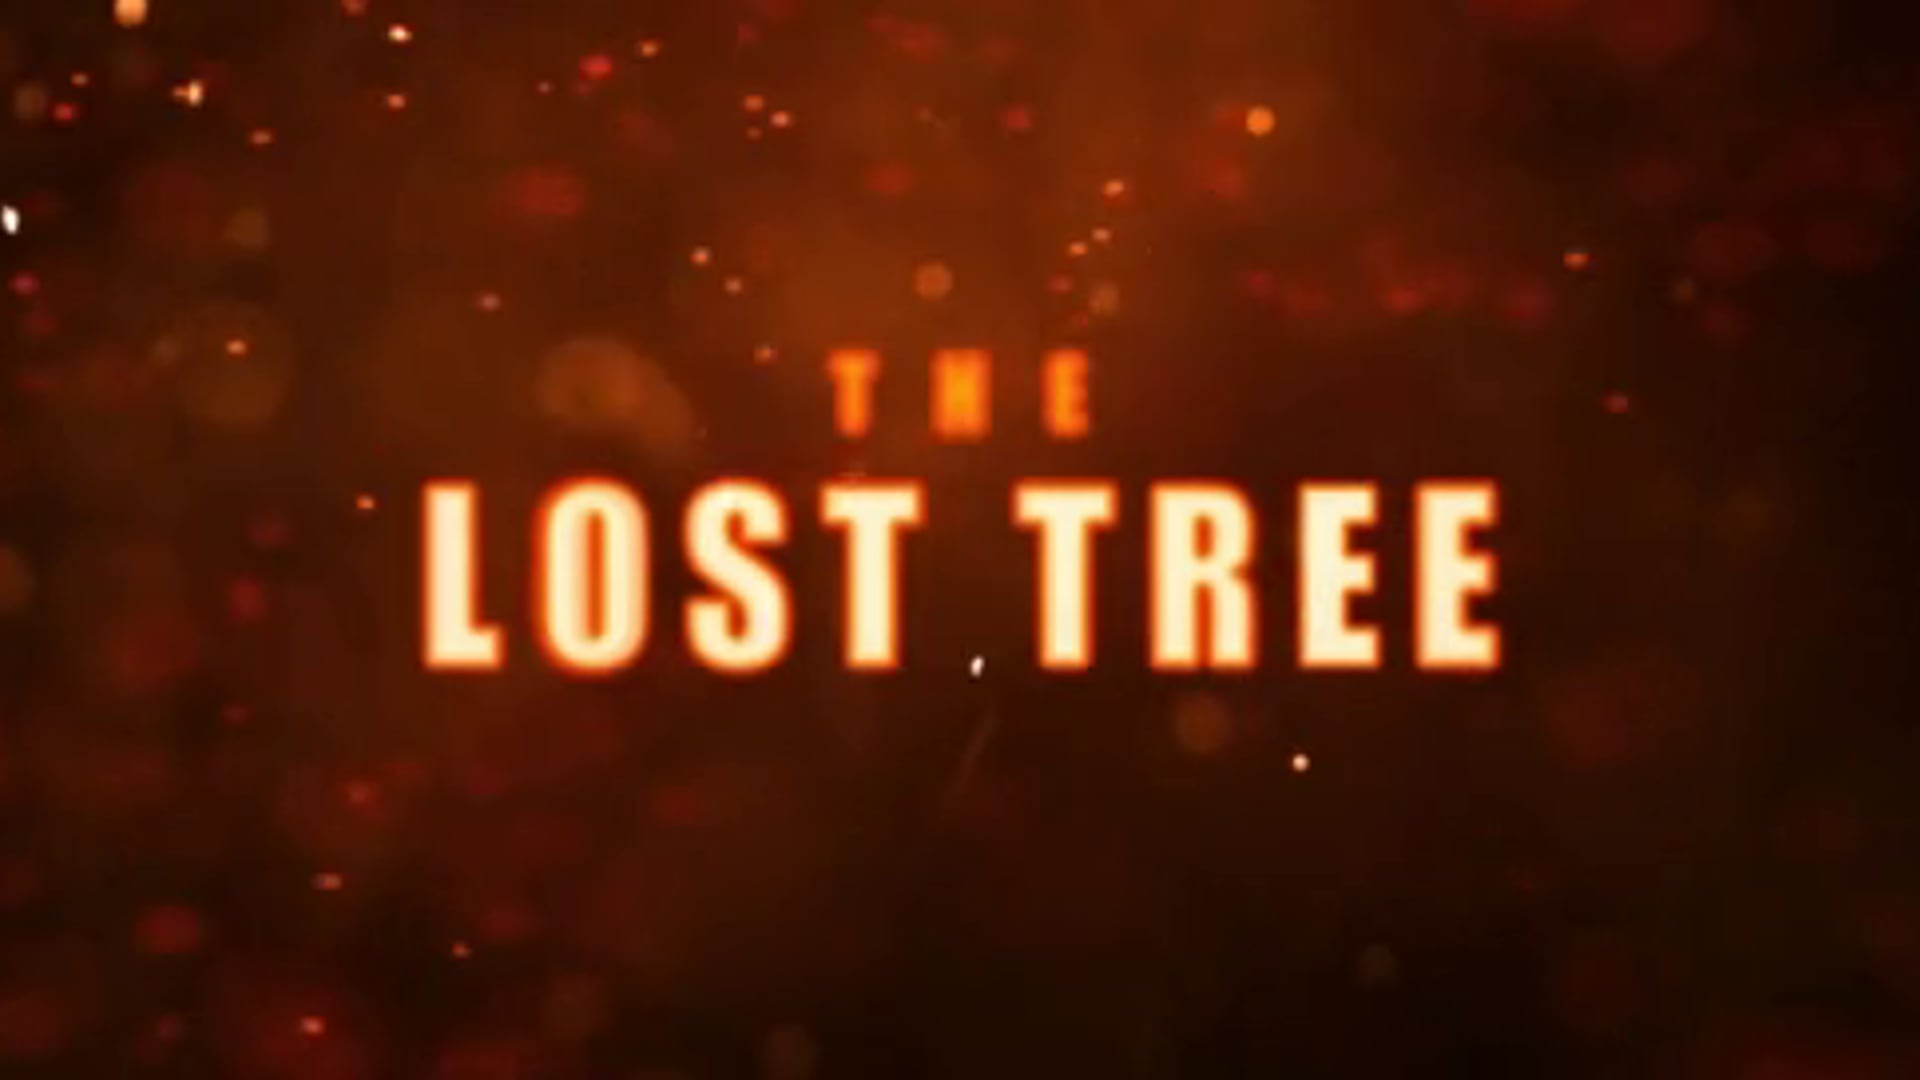 The Lost Tree Official Trailer #1